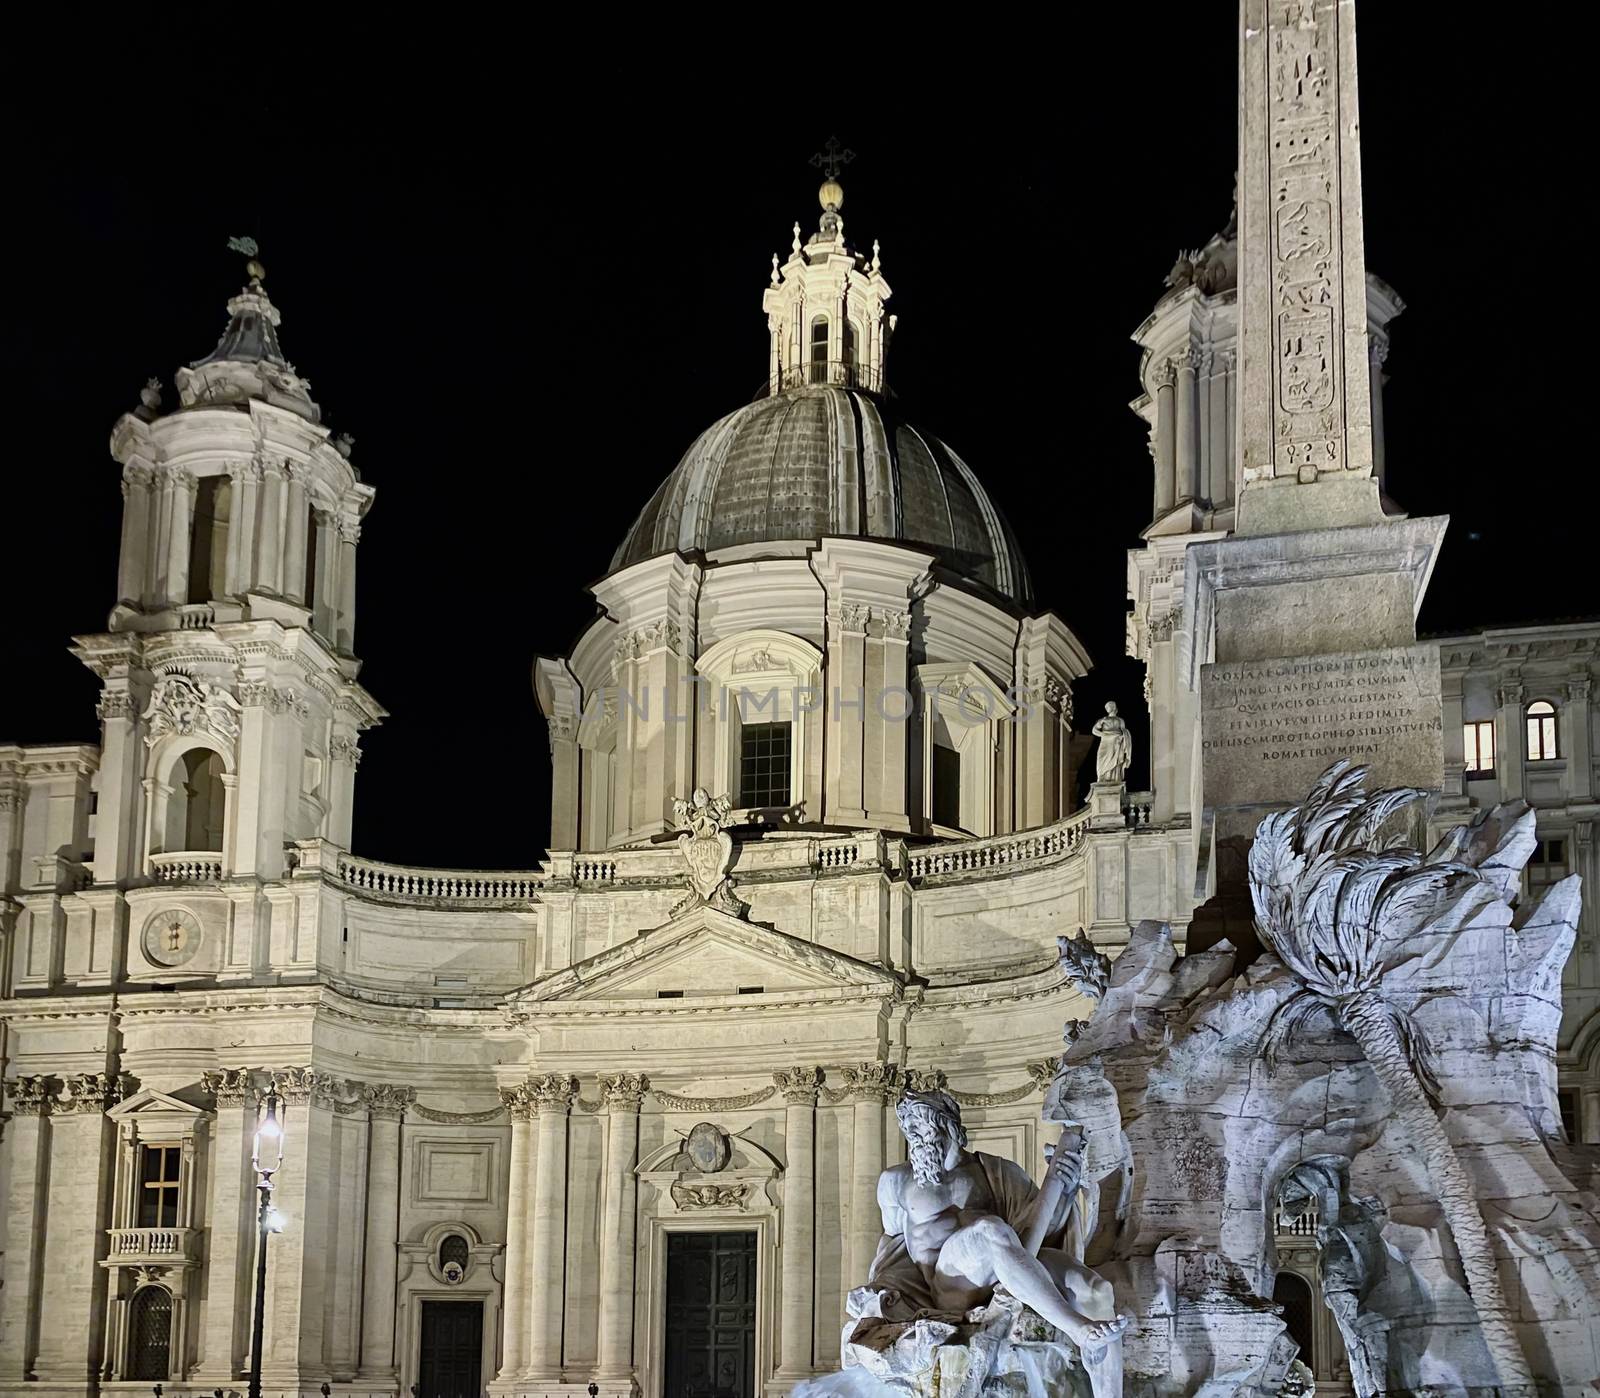 Night shot of the illuminated facade of the baroque church of Sant'Agnese in Agone with the fountain of the four rivers in Piazza Navona in Rome